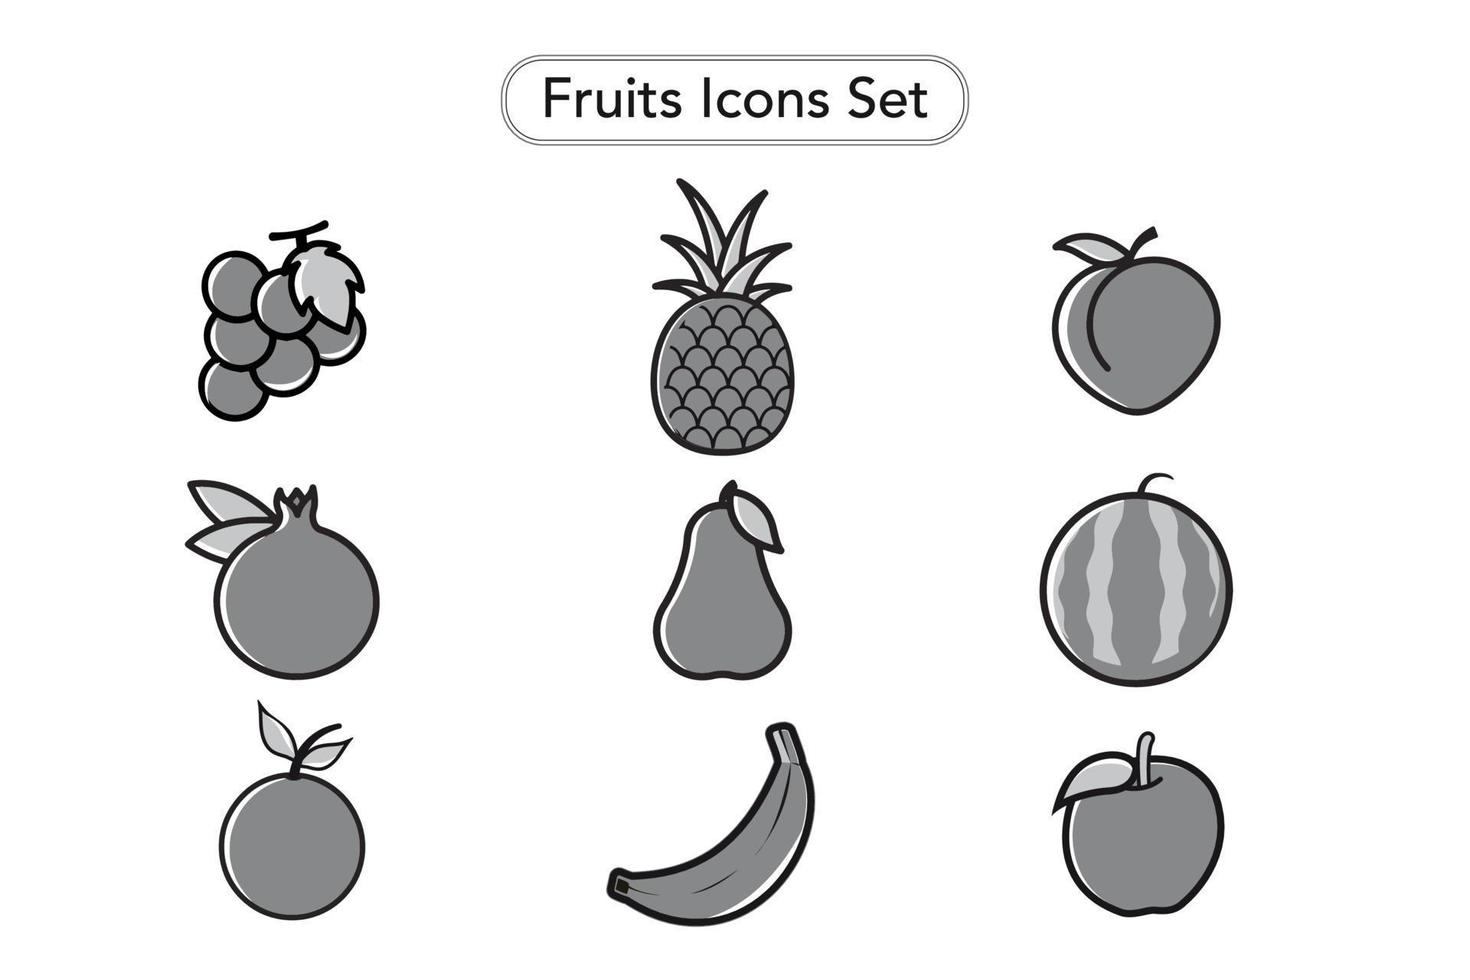 Fruits Icons Set. Fruits Clip arts Collection. Grape, Pomegranate, Peach, Pineapple, Pear, Watermelon, Apple, Orange and Banana. Fruits Stickers Set. Black and white Vectors